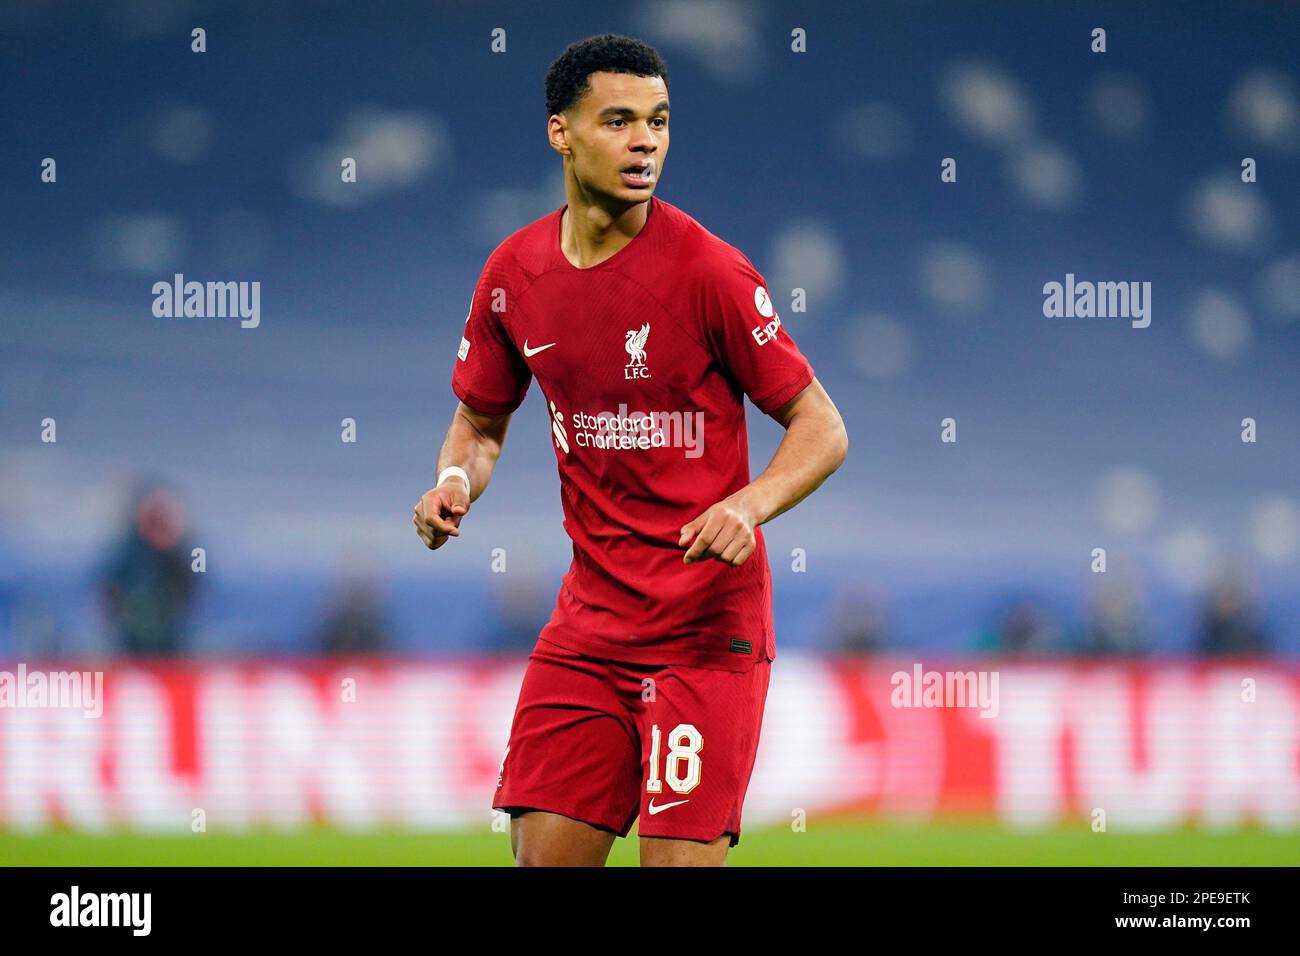 Madrid, Spain. 15th Mar, 2023. Cody Gakpo of Liverpool FC during the UEFA Champions League match, round of 16, 2nd leg between Real Madrid and Liverpool FC played at Santiago Bernabeu Stadium on March 15, 2023 in Madrid, Spain. (Photo by Colas Buera/PRESSIN) Credit: PRESSINPHOTO SPORTS AGENCY/Alamy Live News Stock Photo